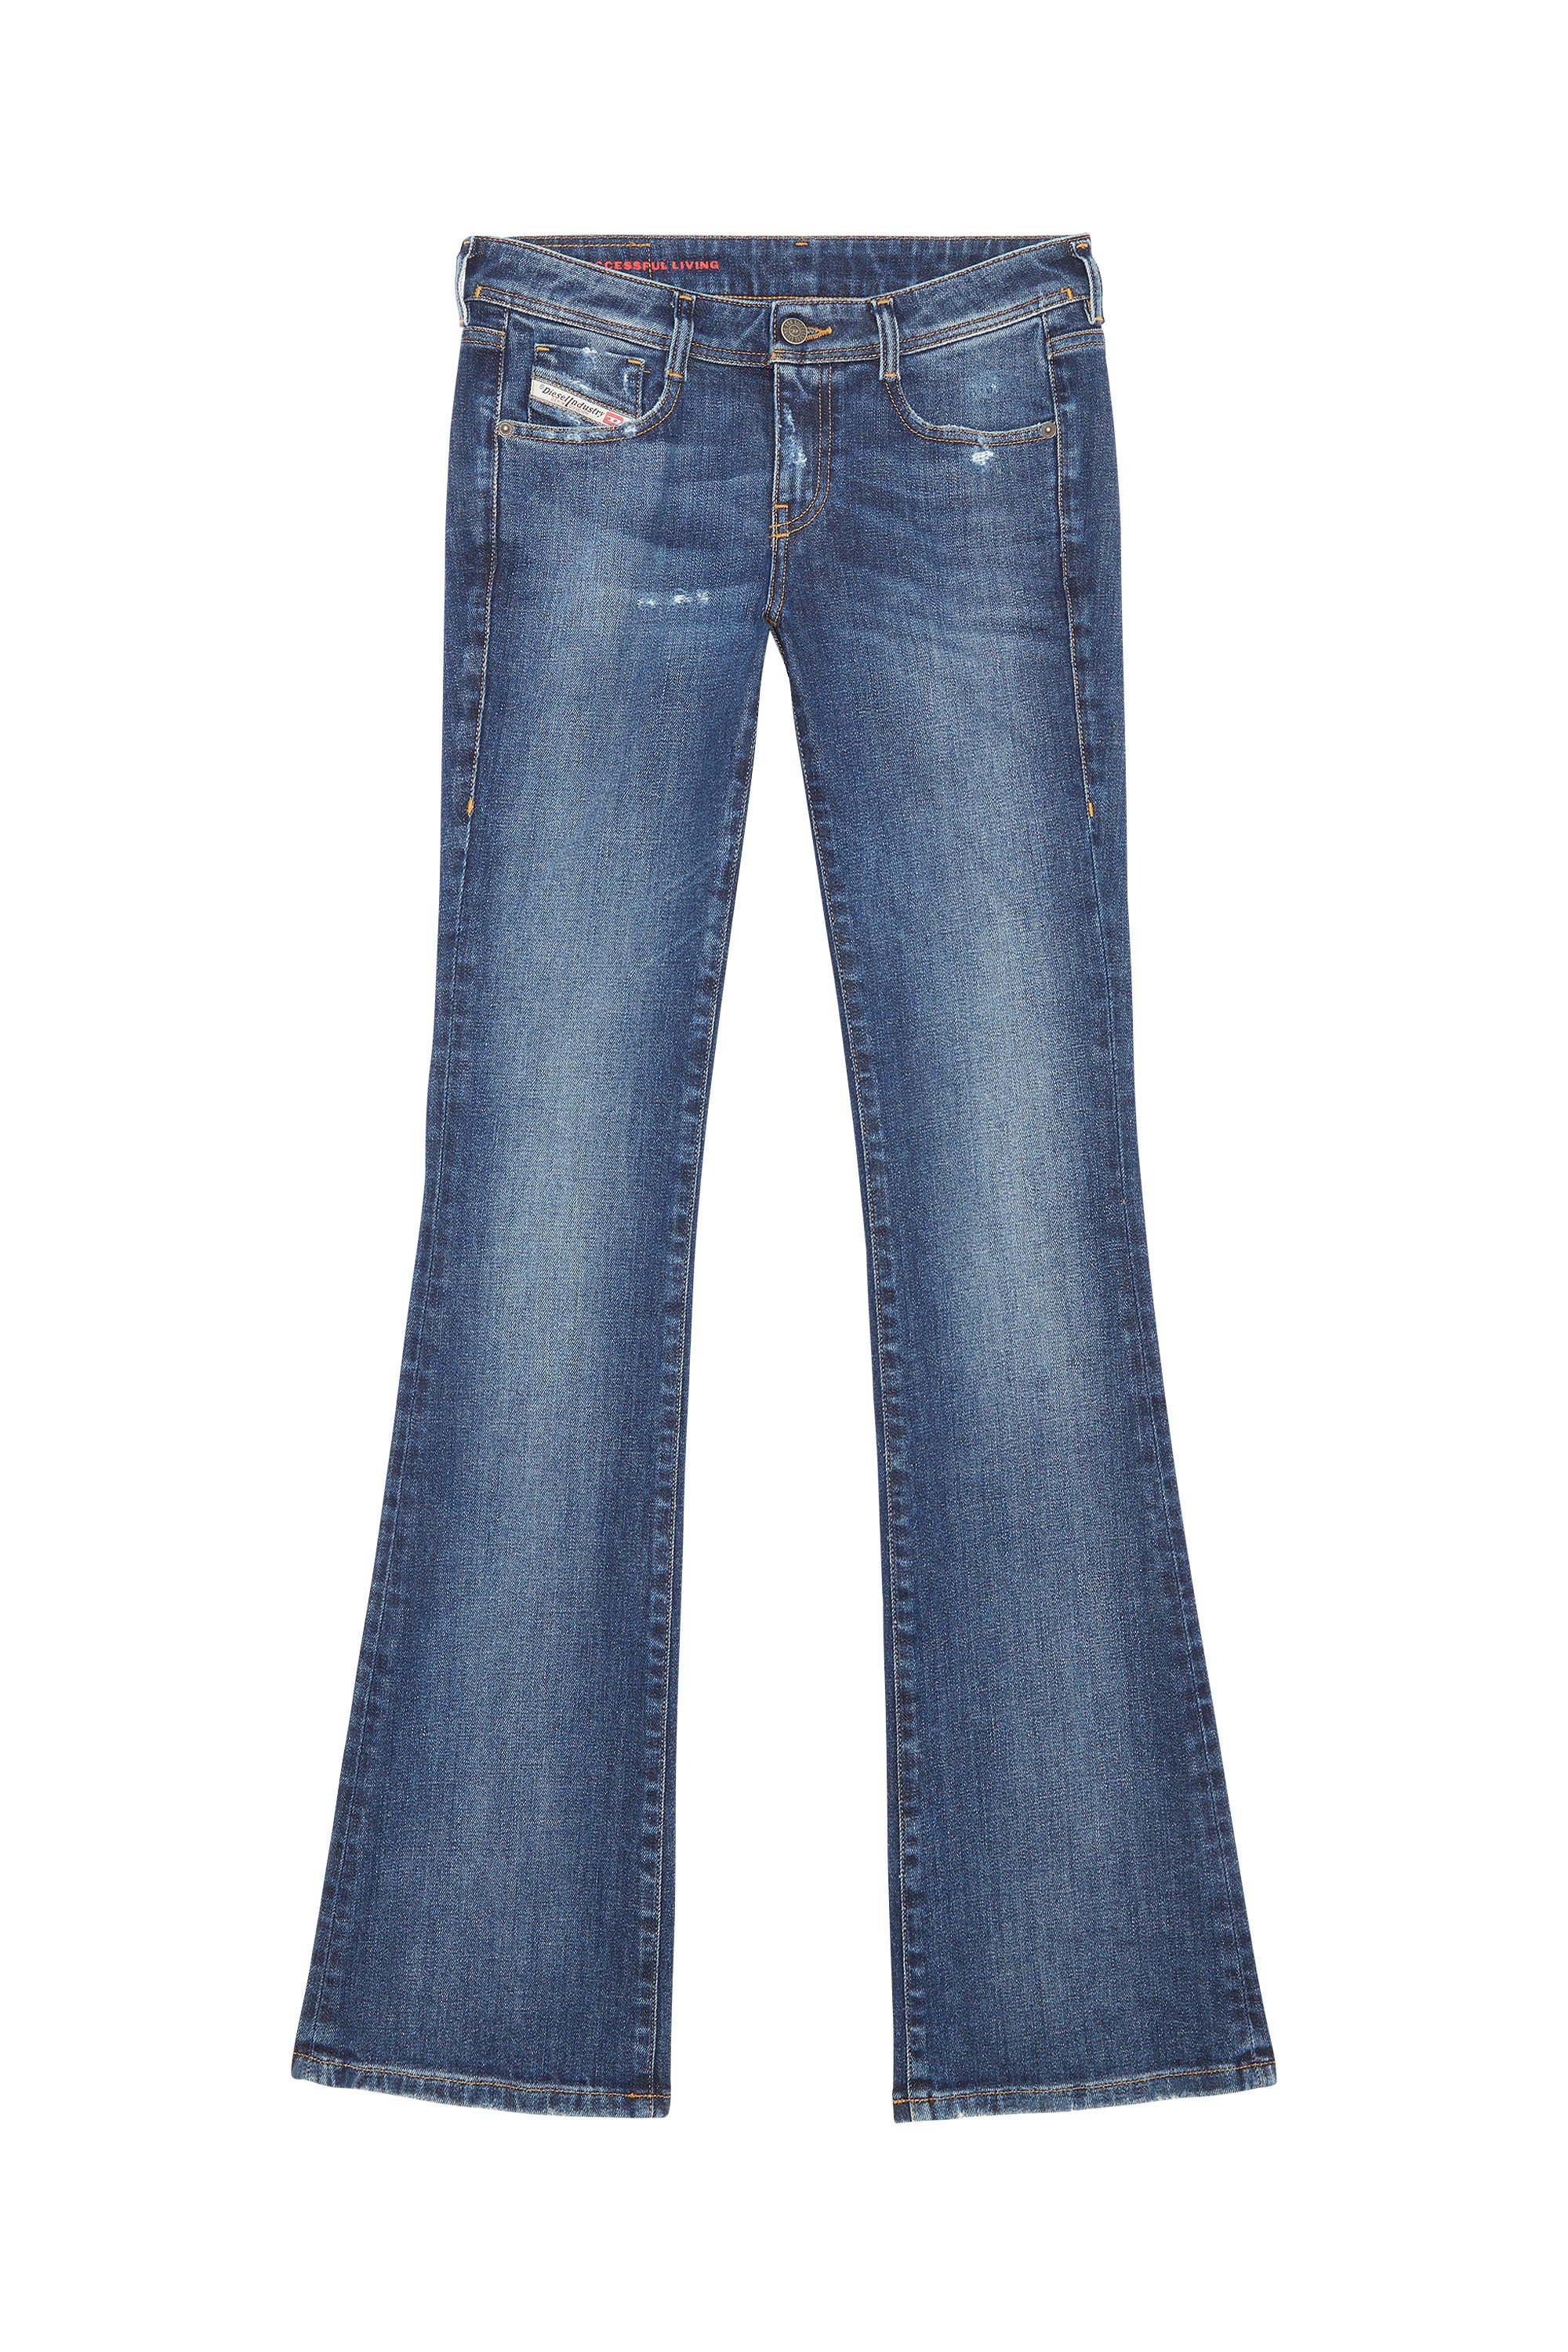 1969 D-EBBEY 09E45 Bootcut and Flare Jeans, Medium blue - Jeans